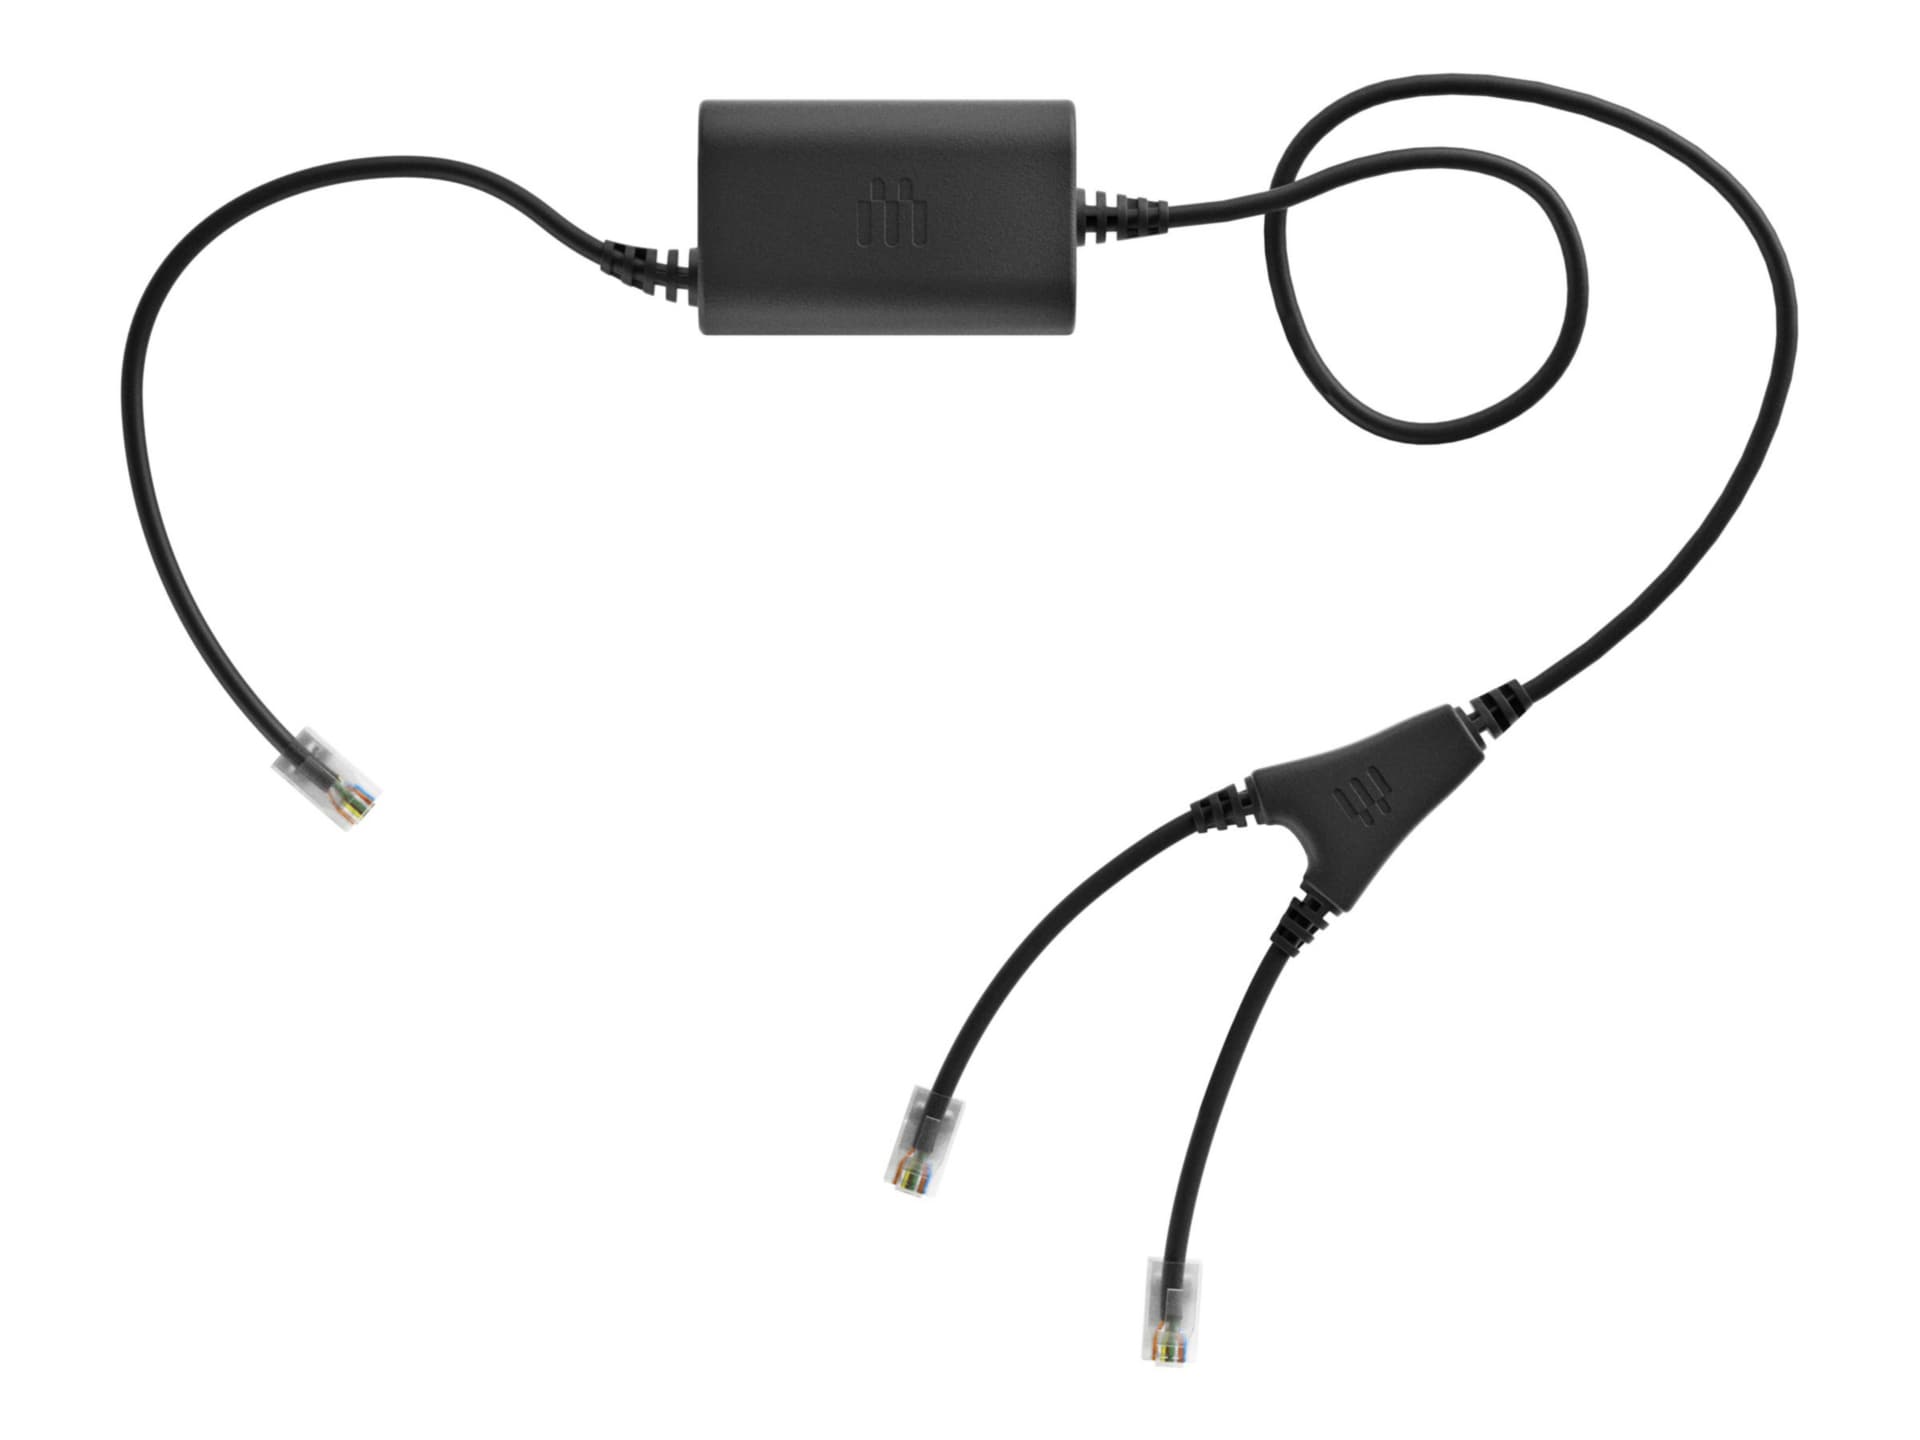 EPOS CEHS AV 03 - electronic hook switch adapter for headset, VoIP phone